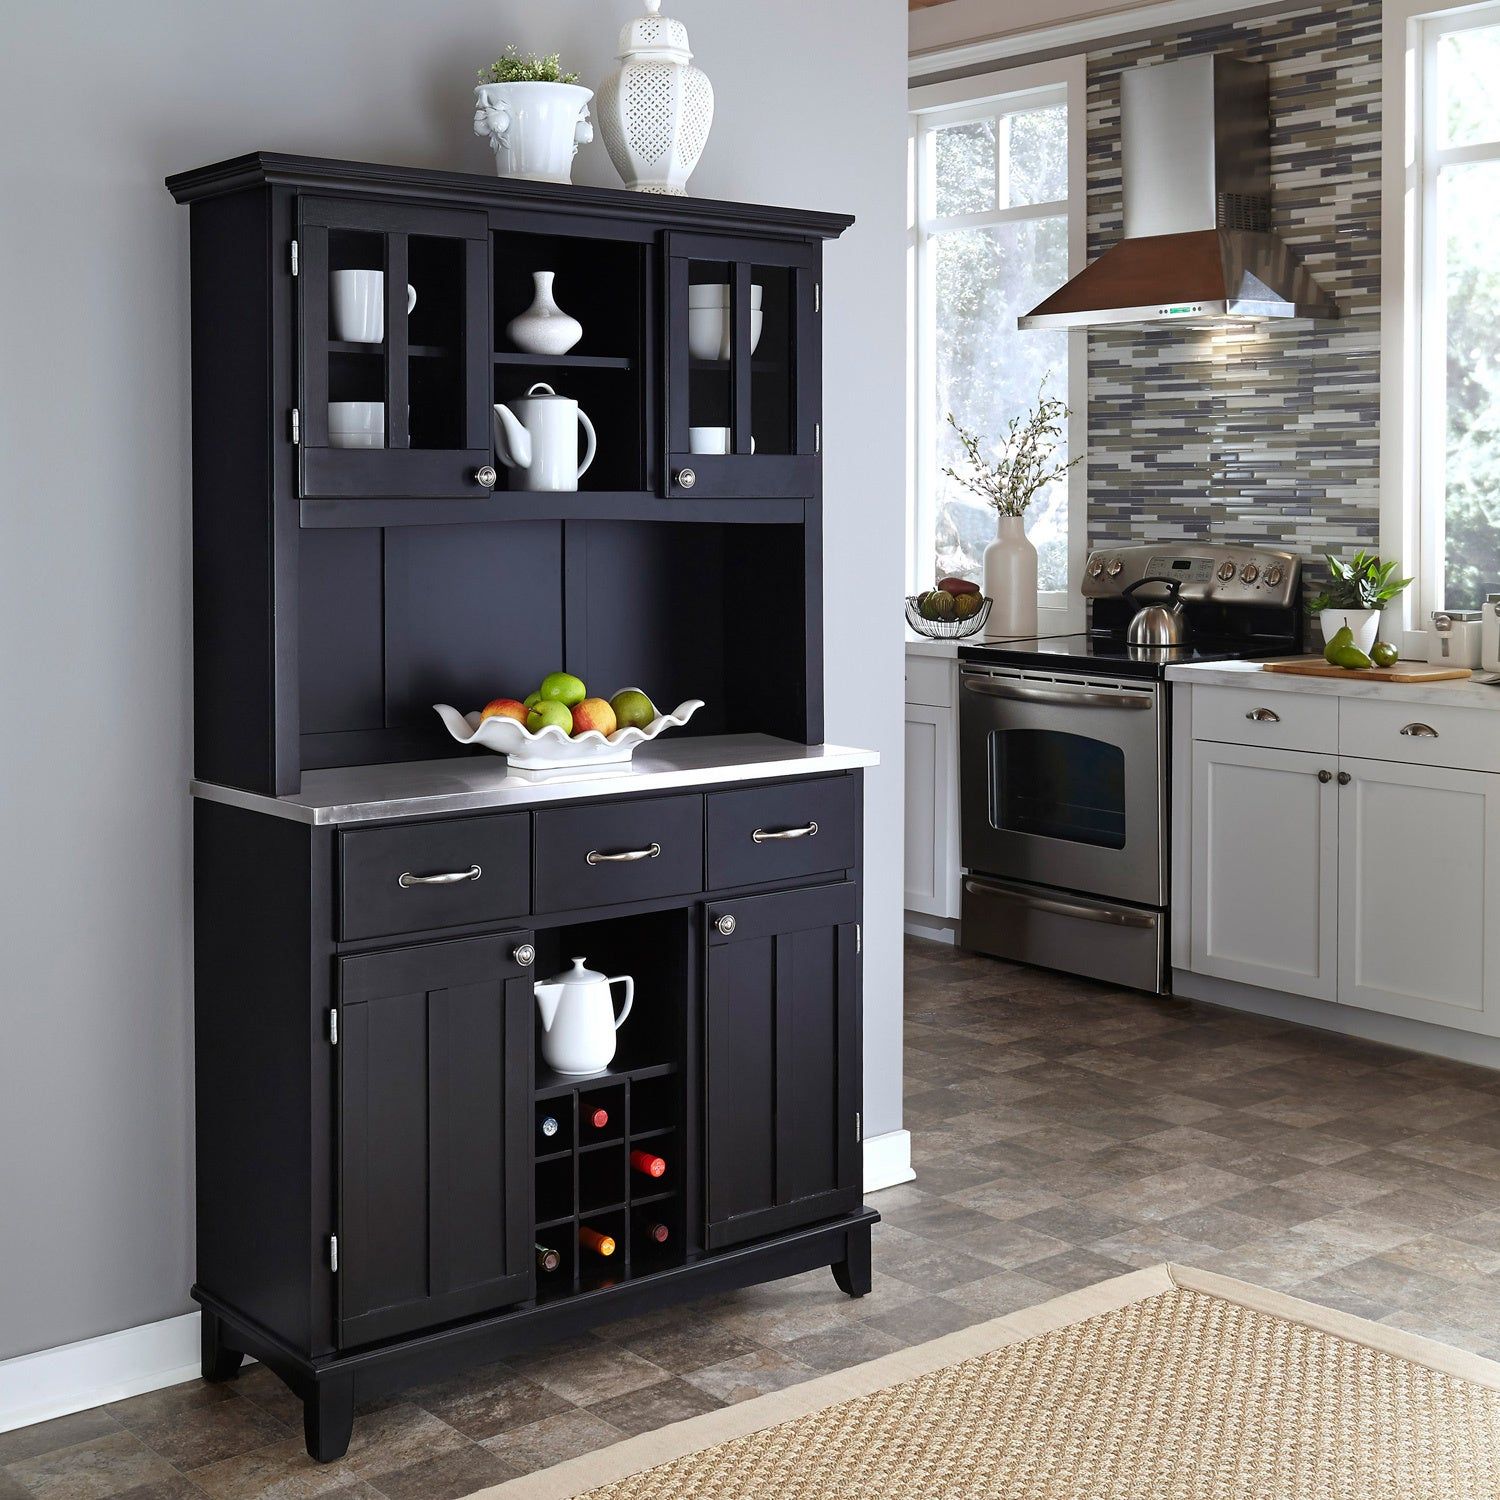 Black Hutch Buffet With Stainless Tophome Styles Regarding Black Hutch Buffets With Stainless Top 